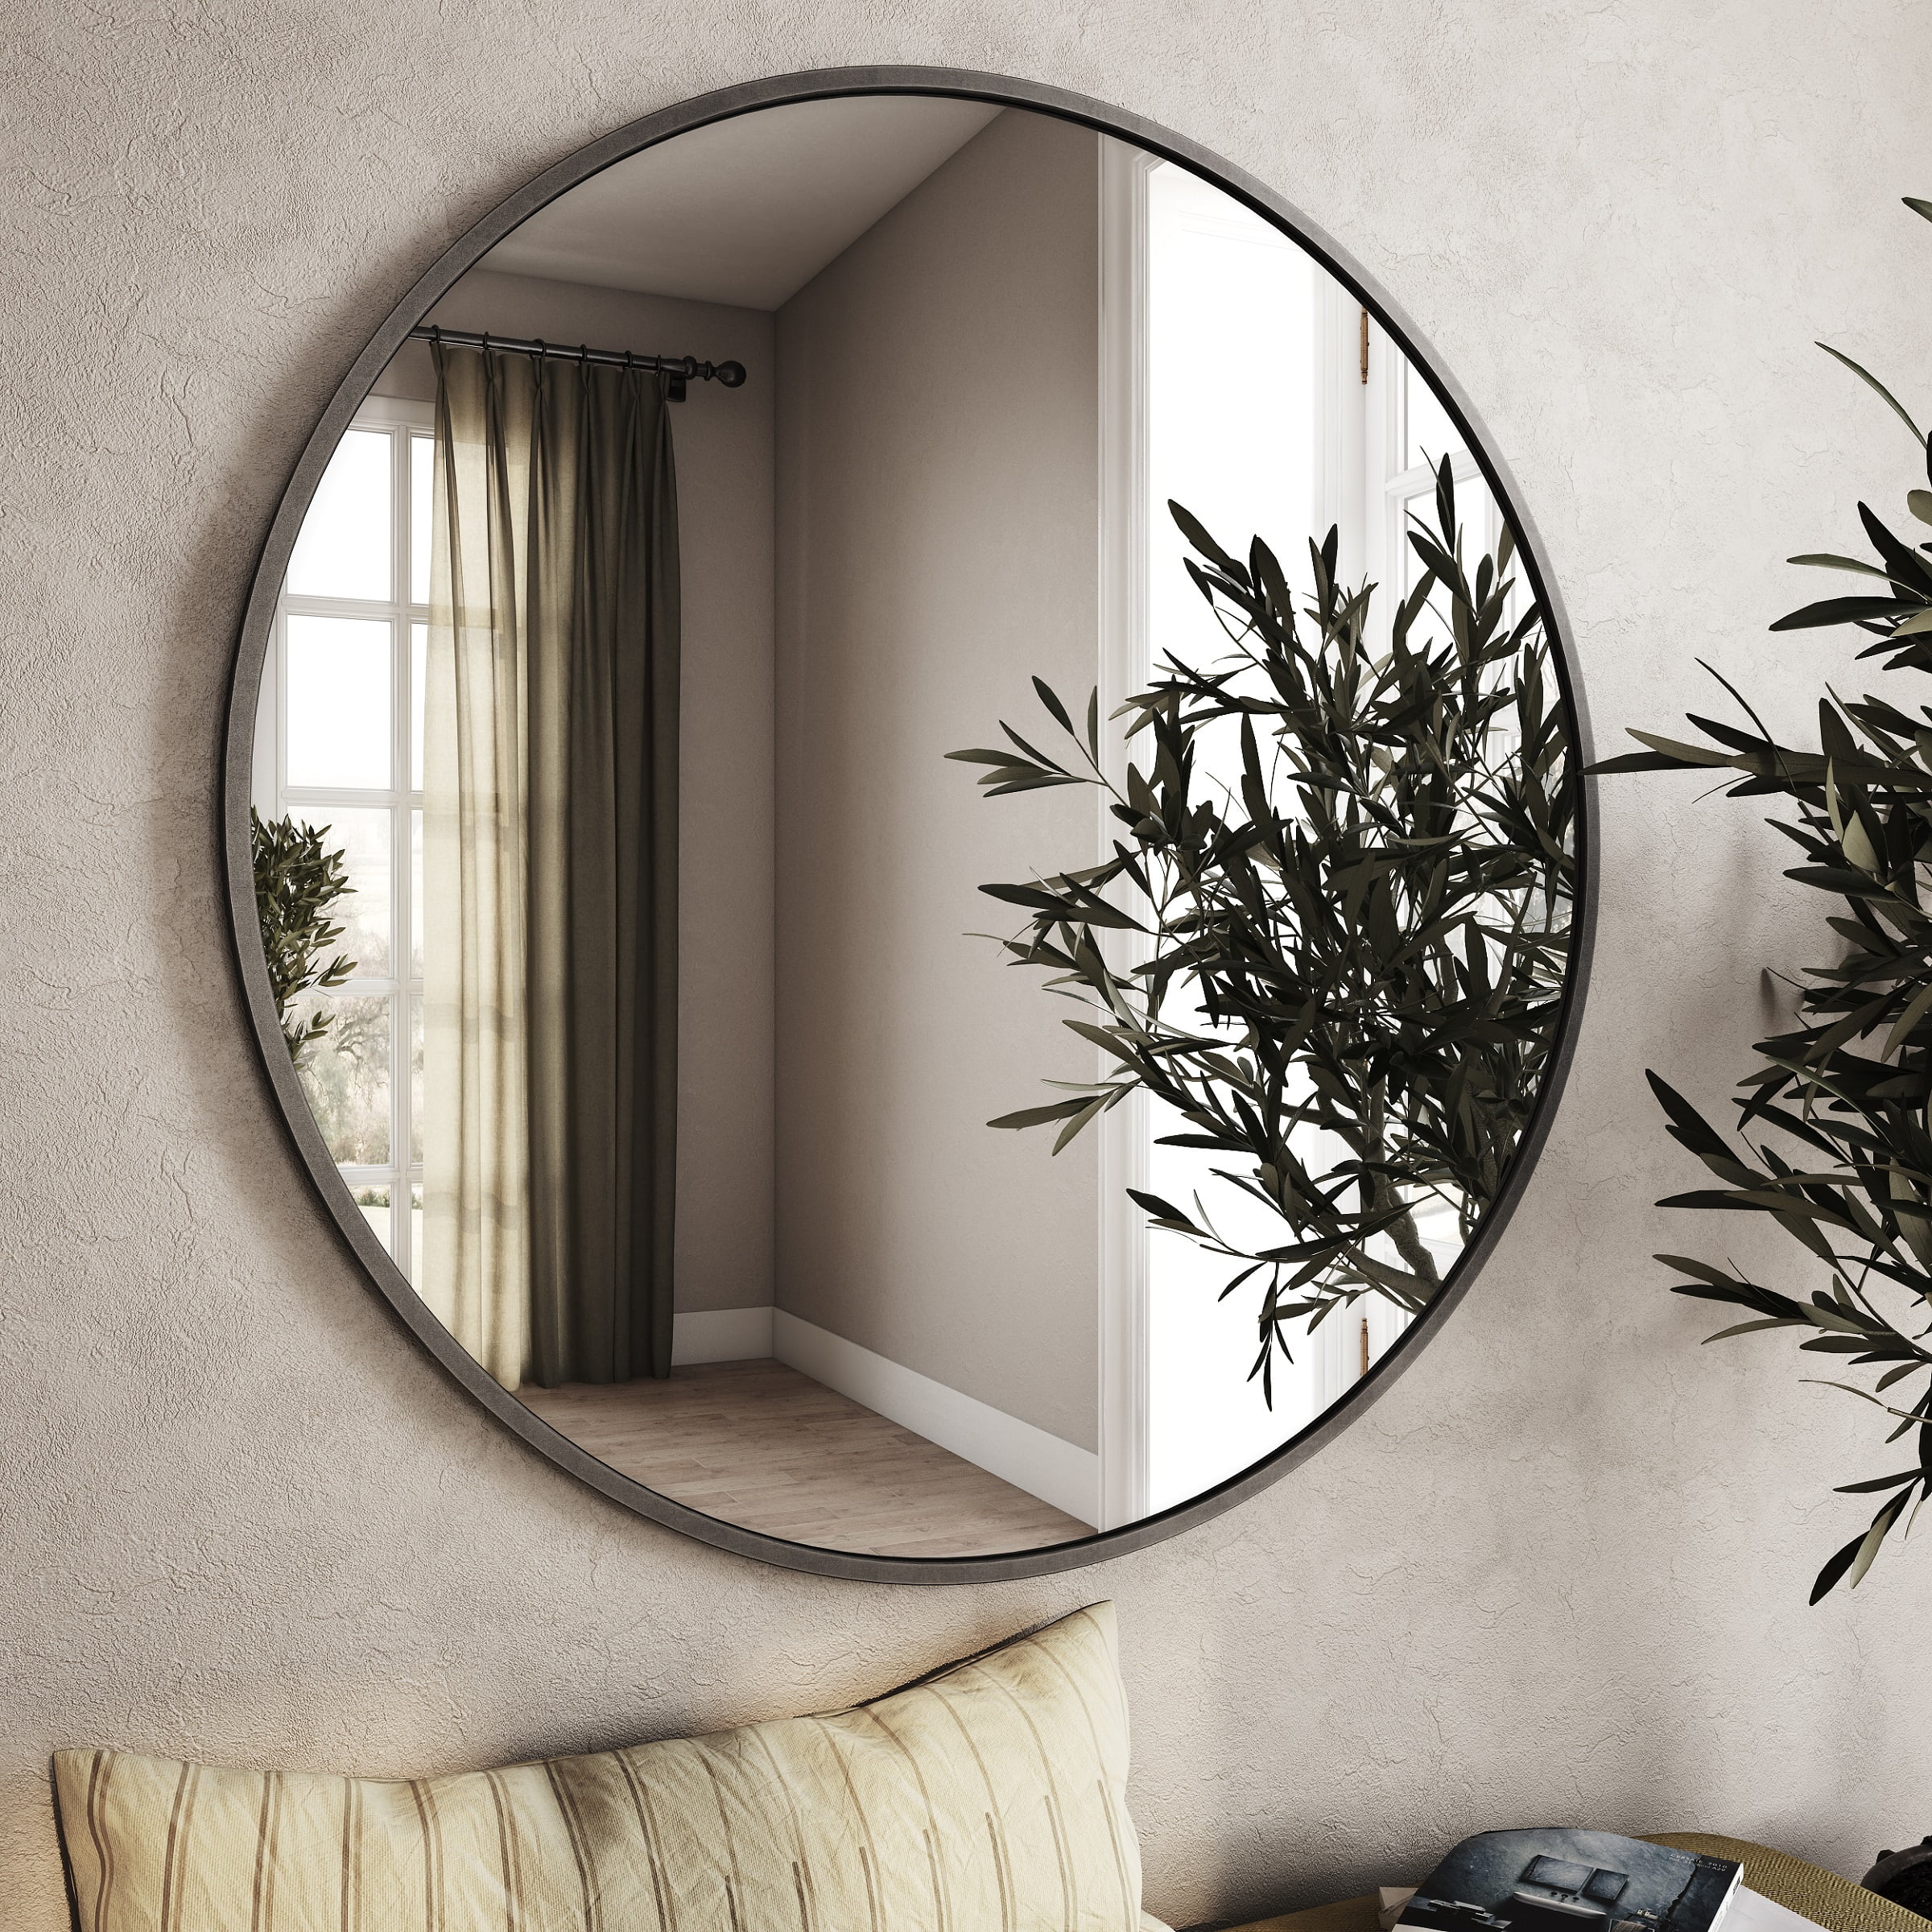 Picture of Aspire Home Accents 7549 Bali Modern Round Wall Mirror, Gray - 40 in.